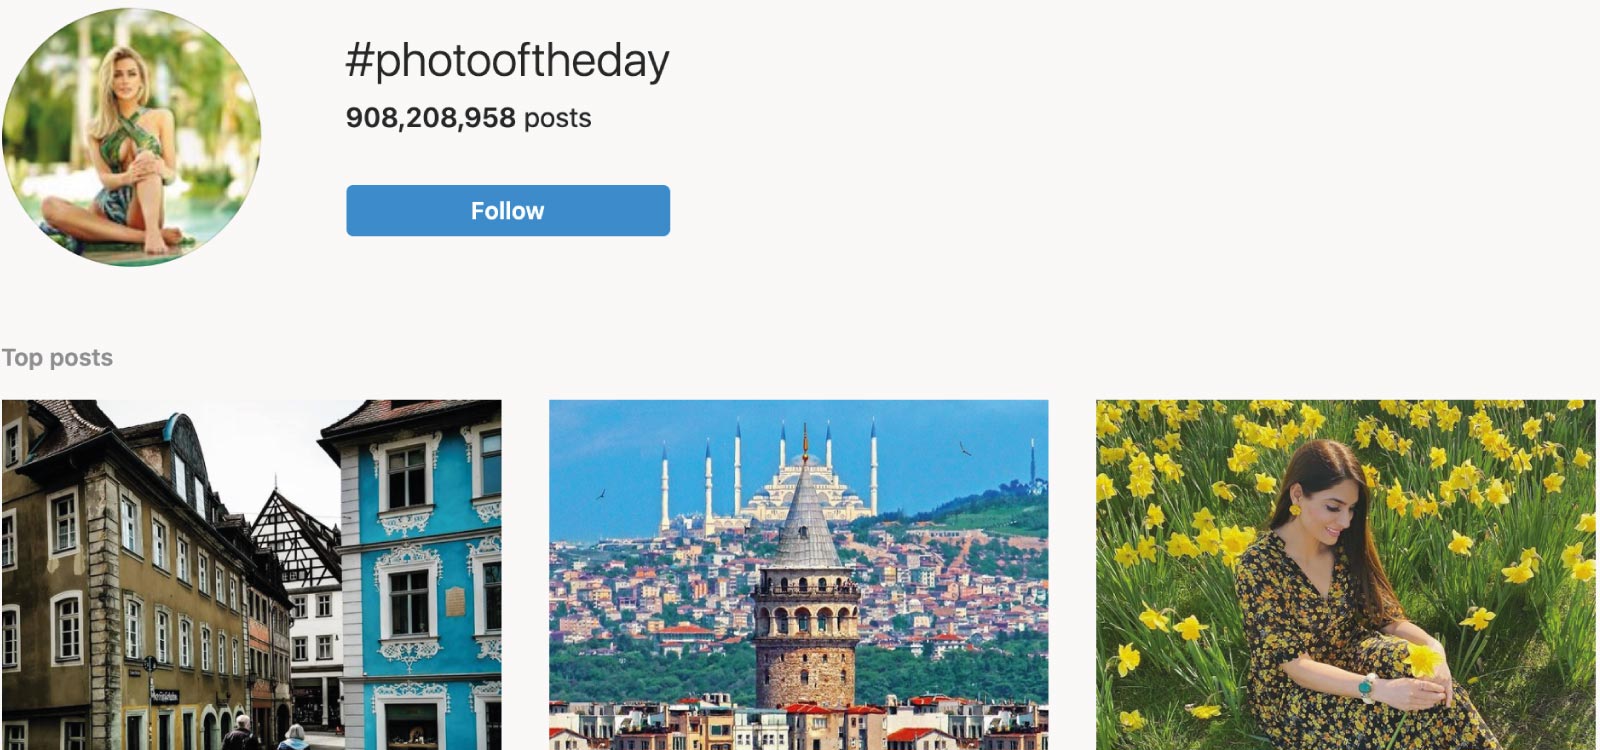 Instagram Statistics and Facts - Hashtags